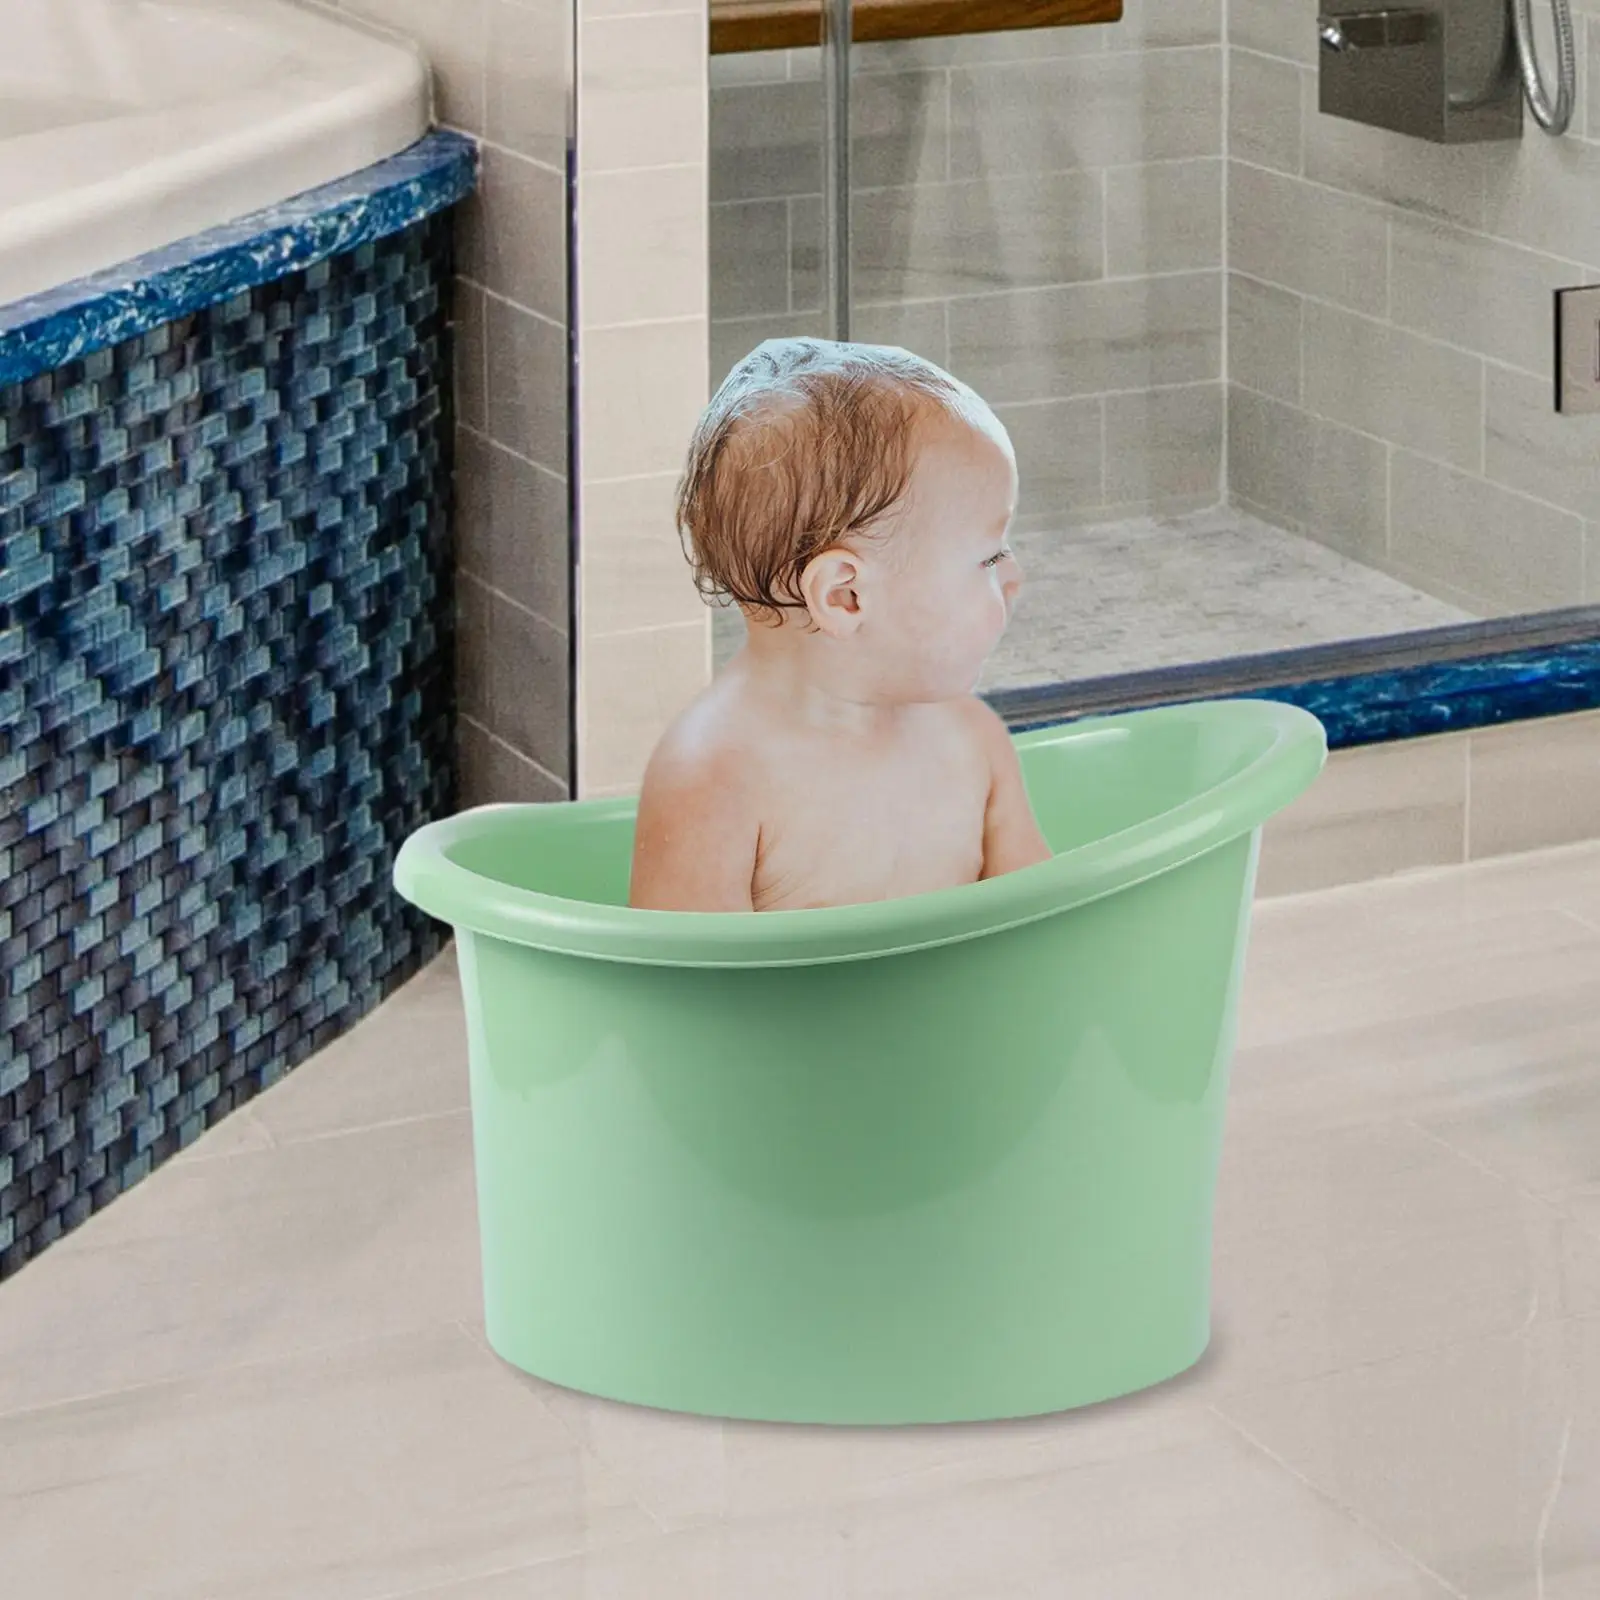 Baby Shower Bucket Tub Sitting up Comfortable Baby Bath Bucket for Ages 0-7 Years Old Boys and Girls Infants Gifts Babies